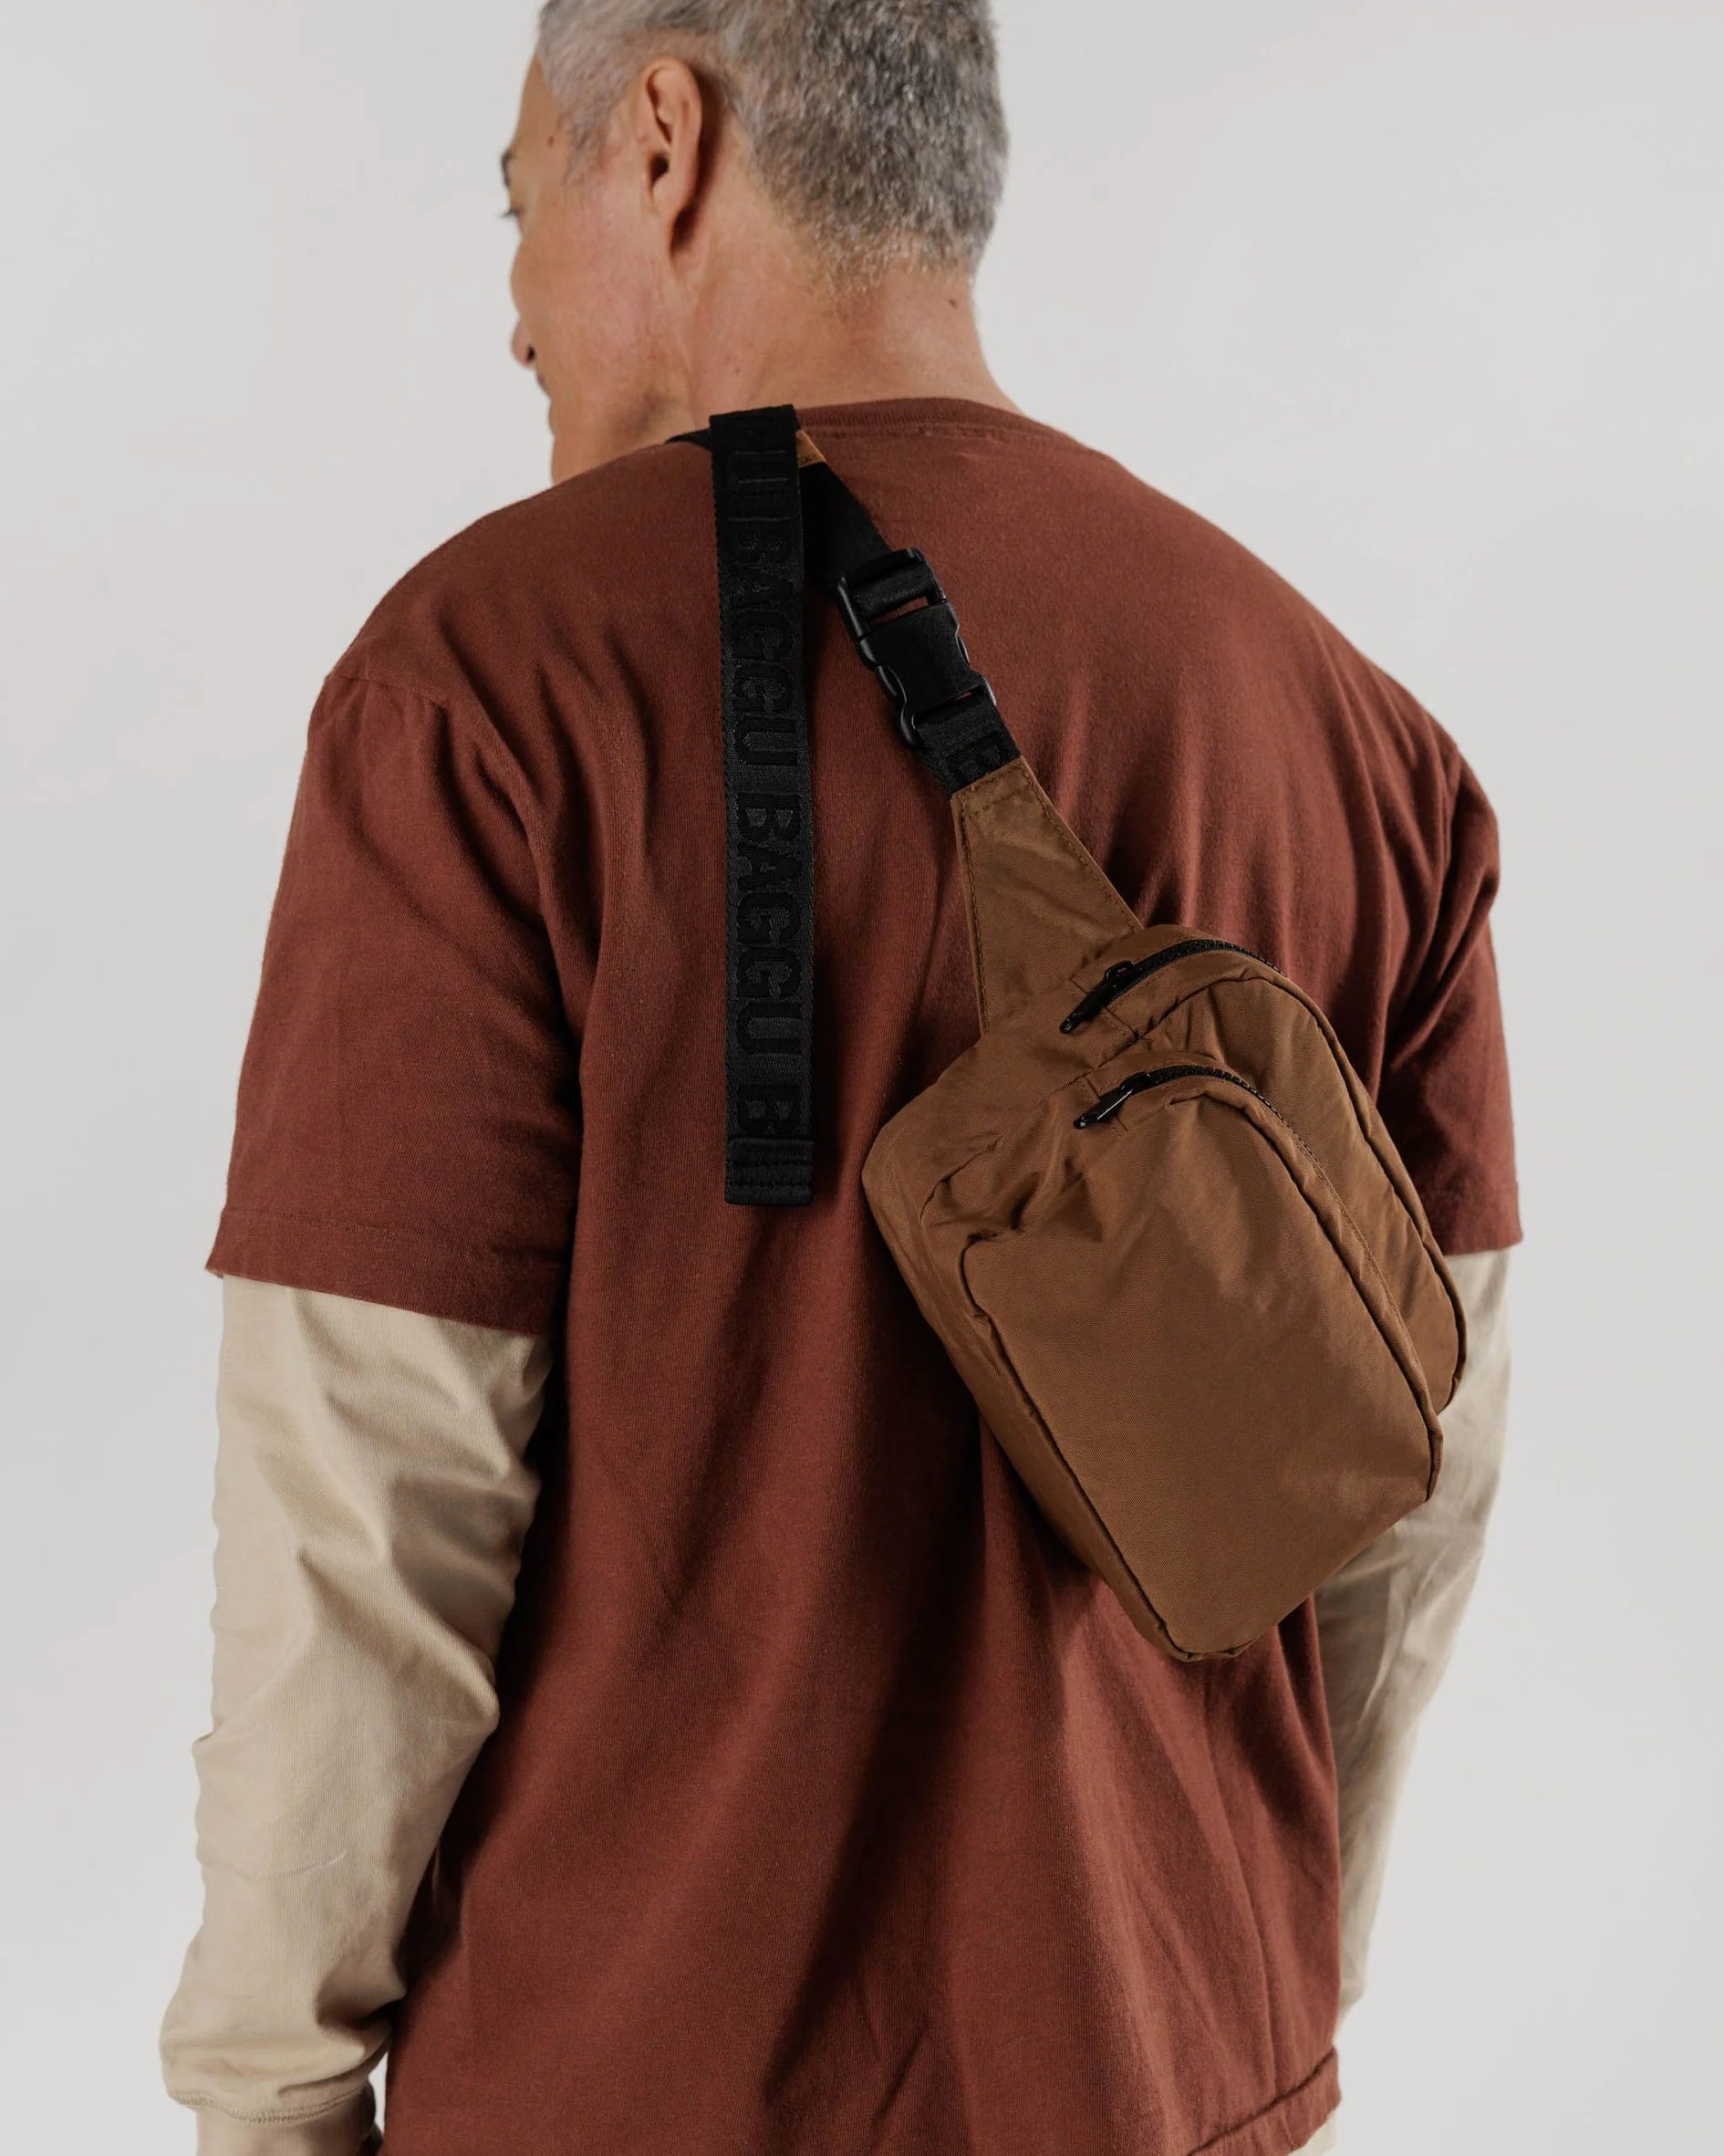 Baggu Fanny Pack-Brown | Collective Request 